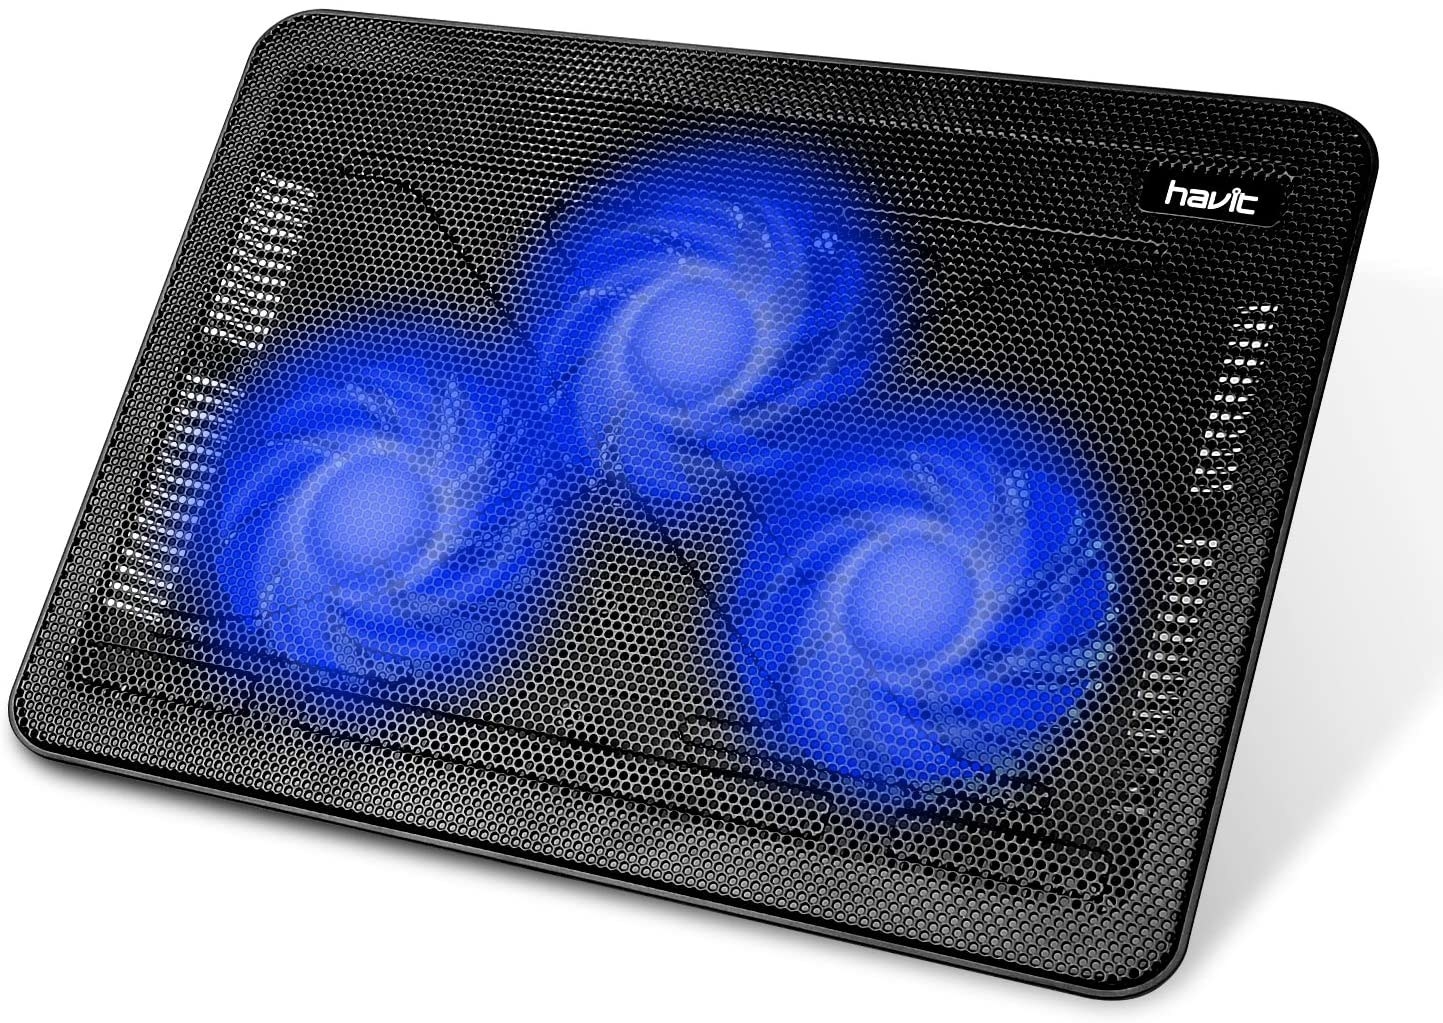 The laptop cooling pad with fans lit up